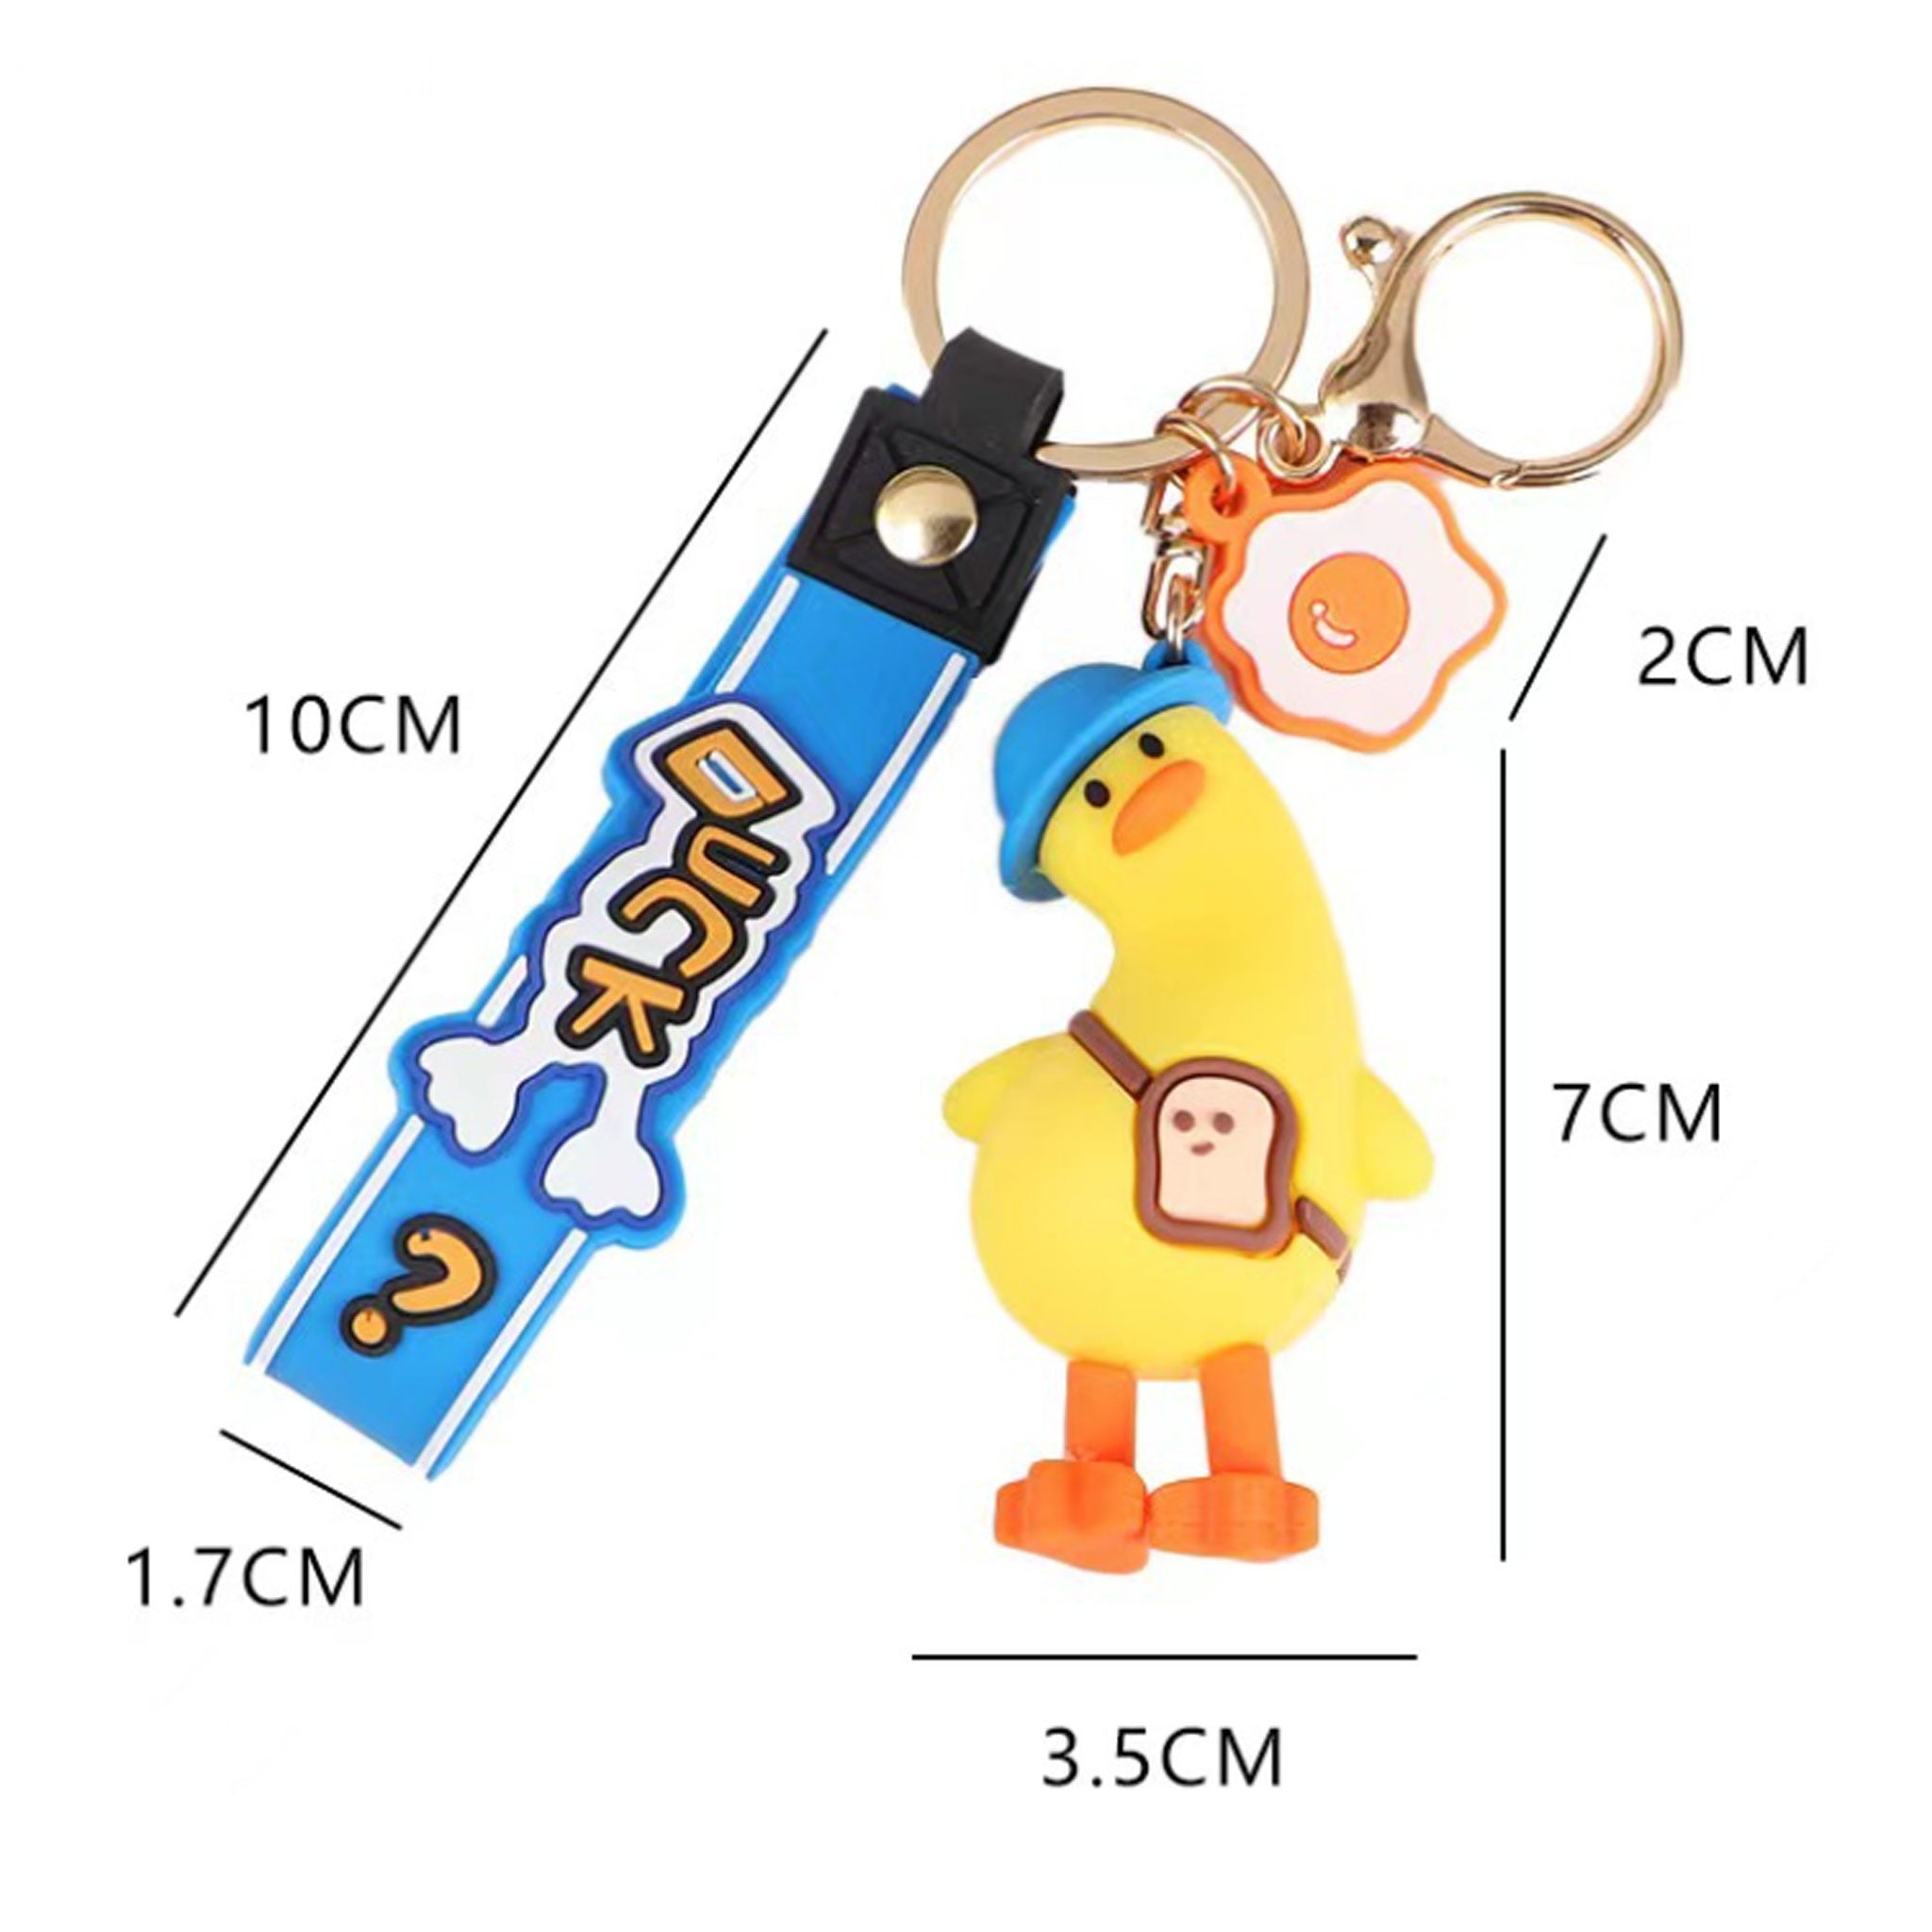 Wisted-neck Duck Plush Keychain